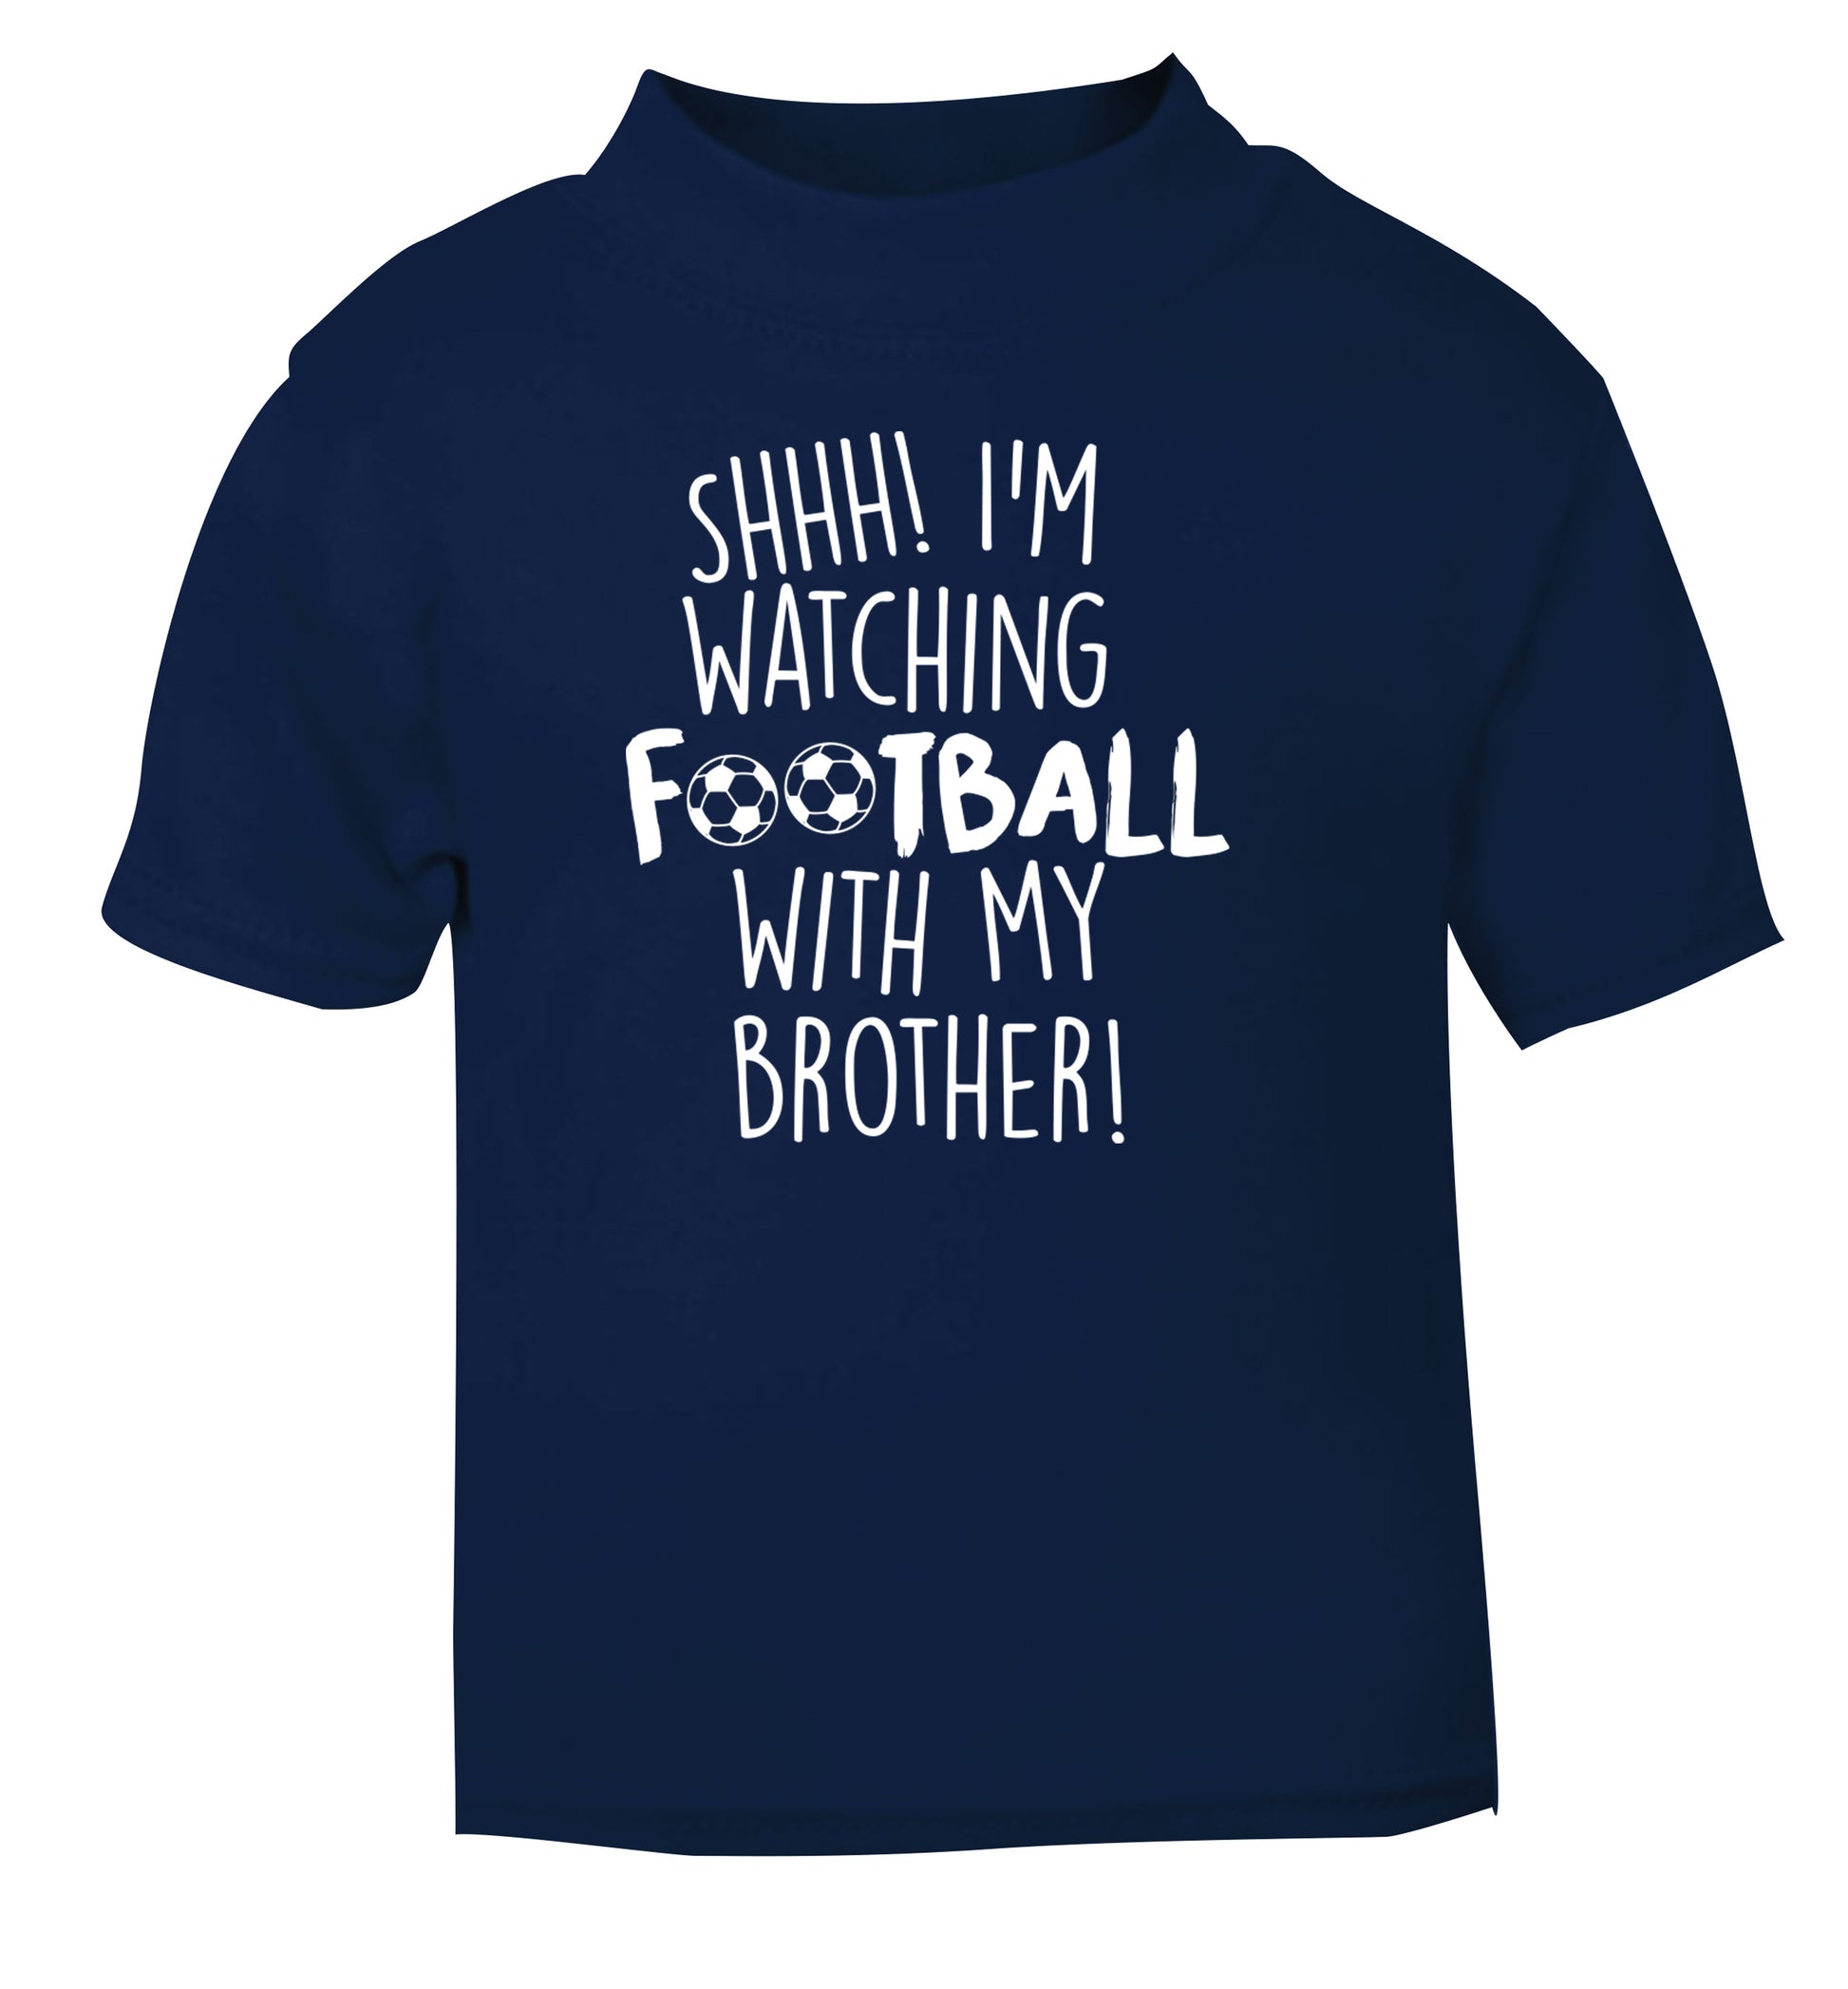 Shhh I'm watching football with my brother navy Baby Toddler Tshirt 2 Years